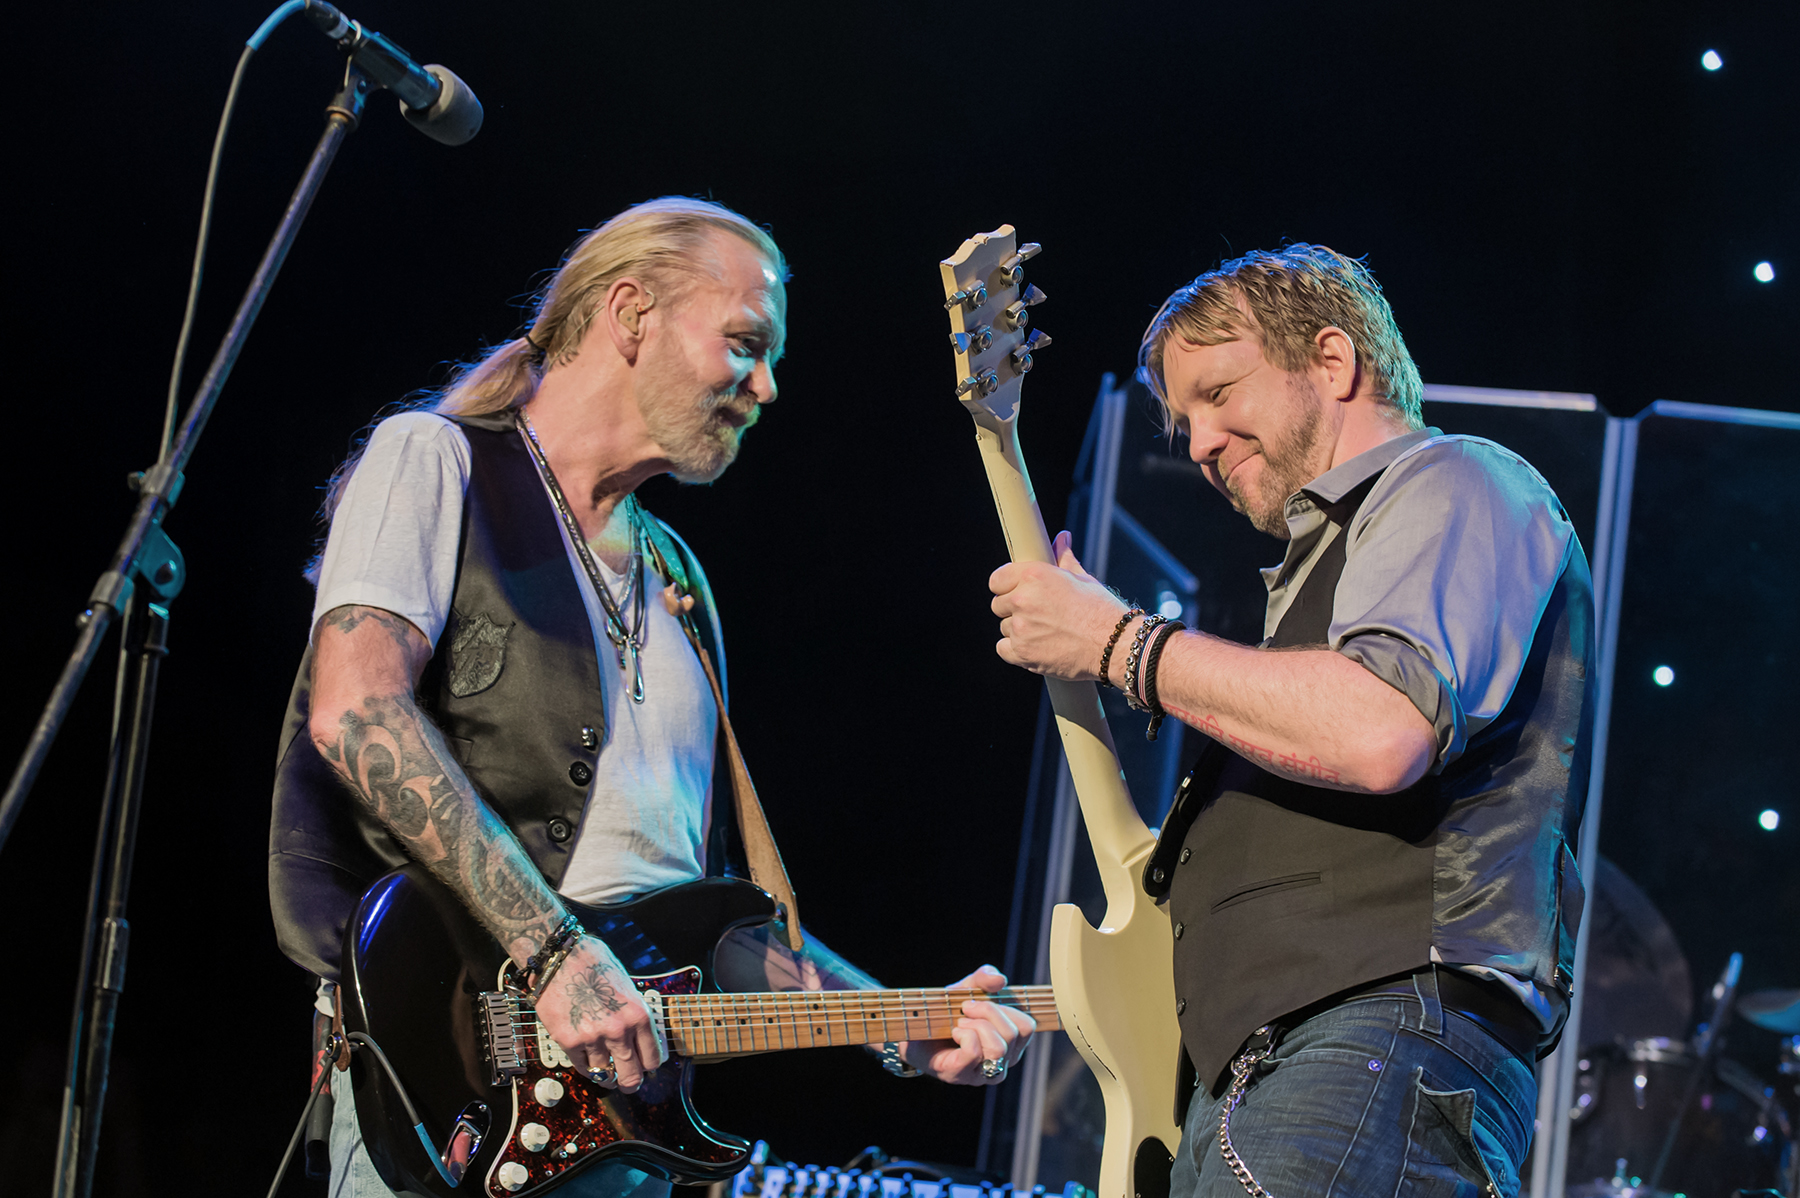 A white man with blonde hair pulled back in a pony tail and a blond beard wearing a gray tee and leather vest plays an electric guitar alongside another white man with short brown hair wearing a gray collared shirt and Black vest also playing an electric guitar.